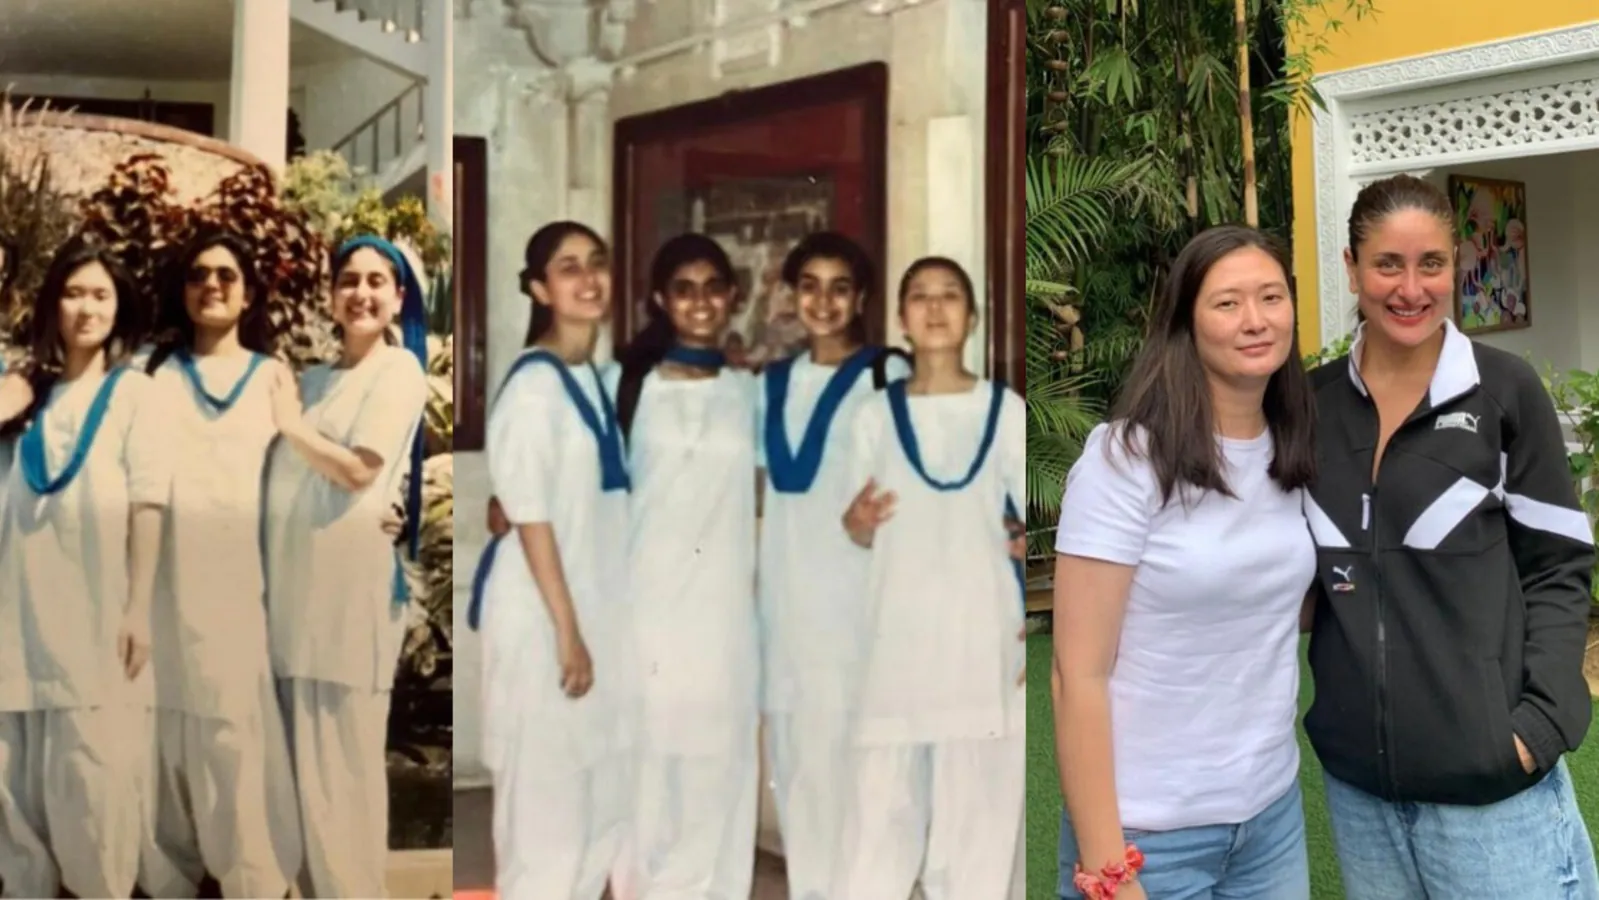 Kareena Kapoor runs into old friend in Kalimpong, shares pics from their 1996 school trip to Rajasthan